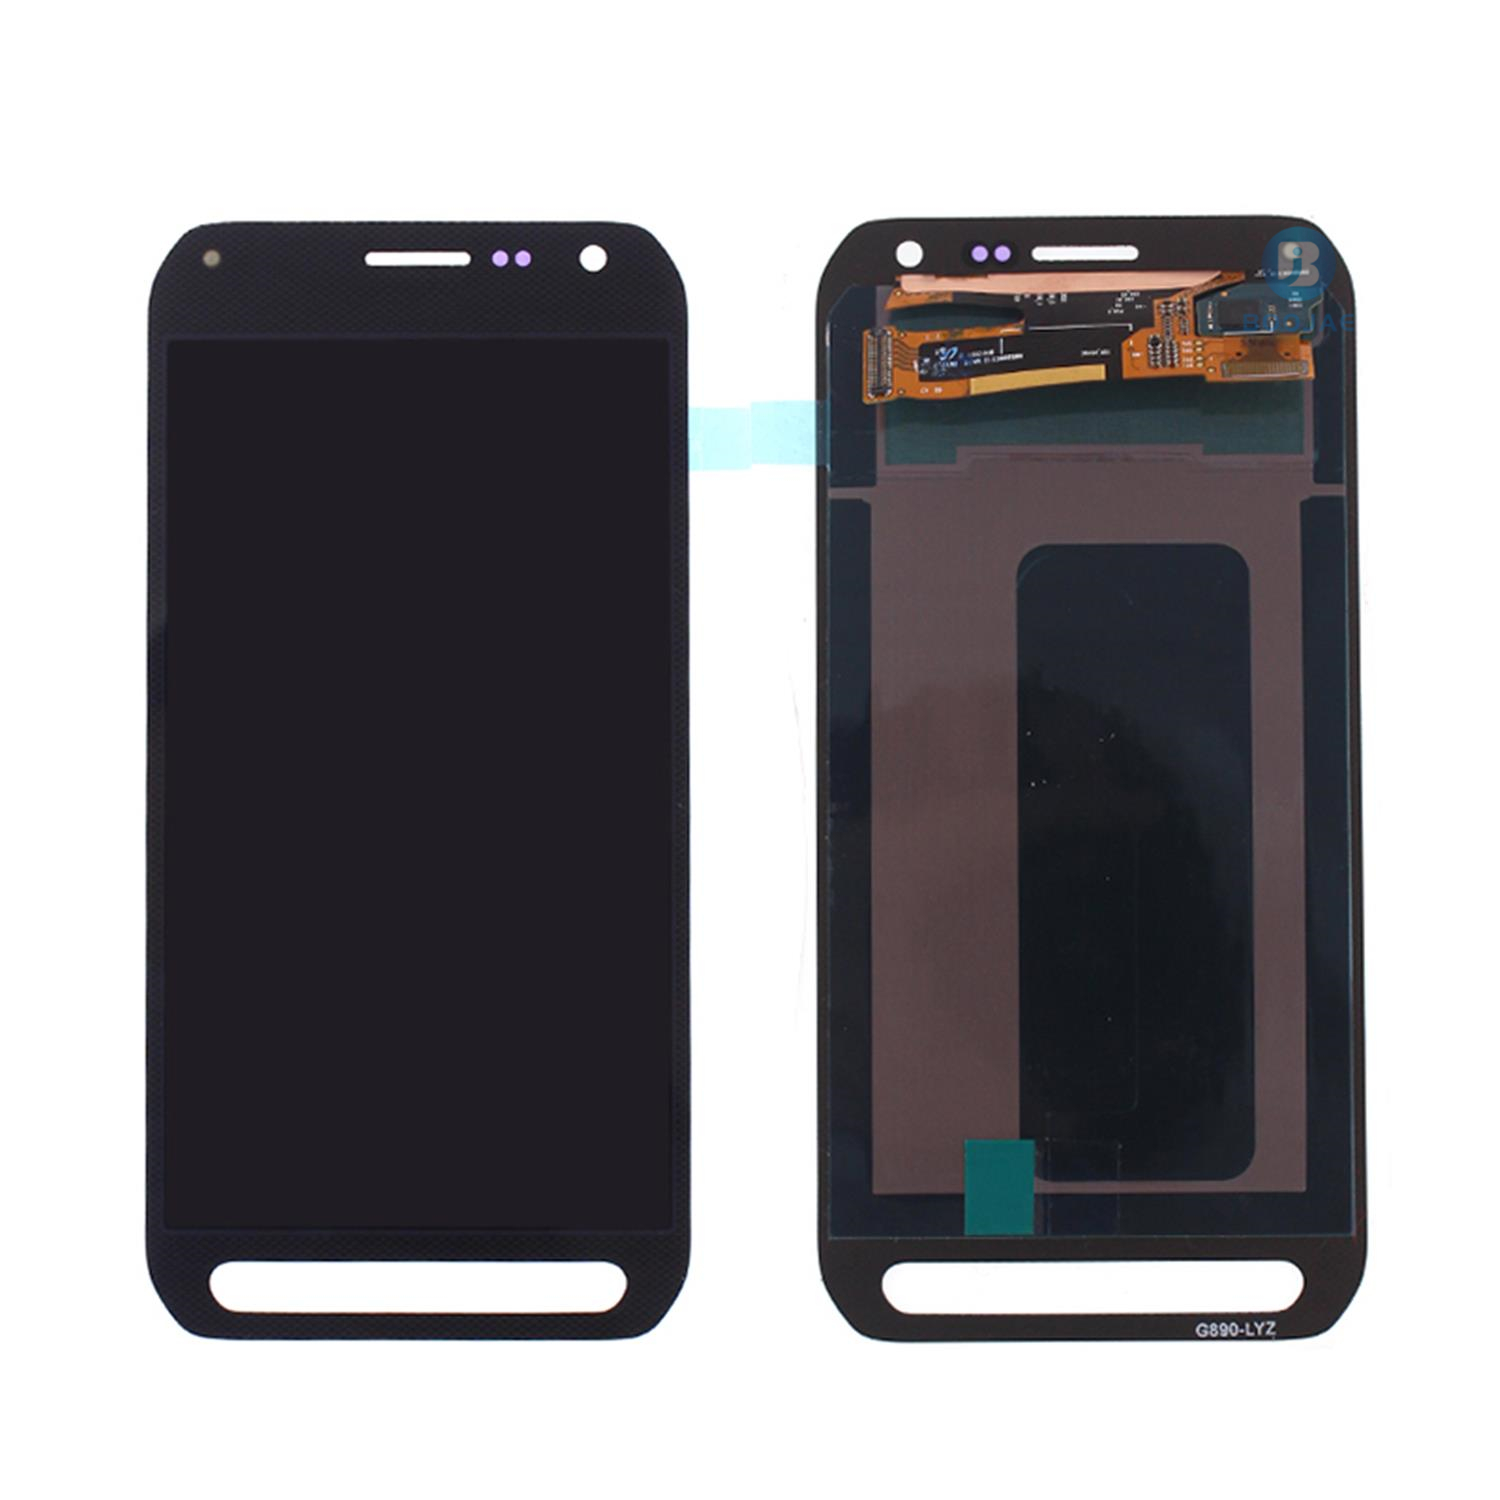 Samsung Galaxy S6 Active LCD Screen Display and Touch Panel Digitizer Assembly Replacement